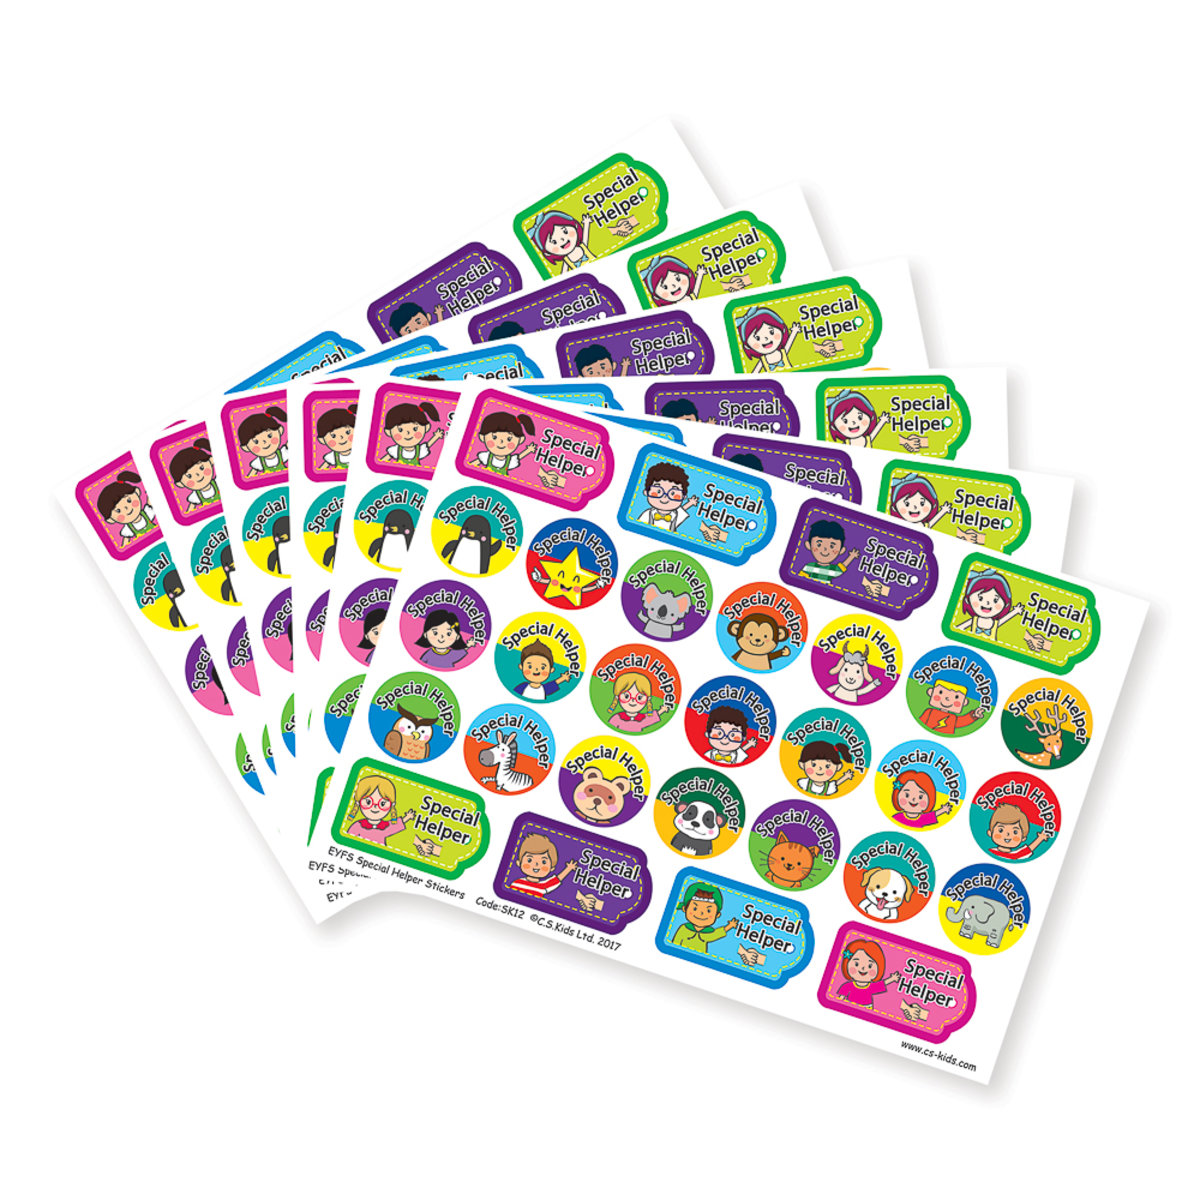 EYFS Special Helper Stickers (Pack of 174)